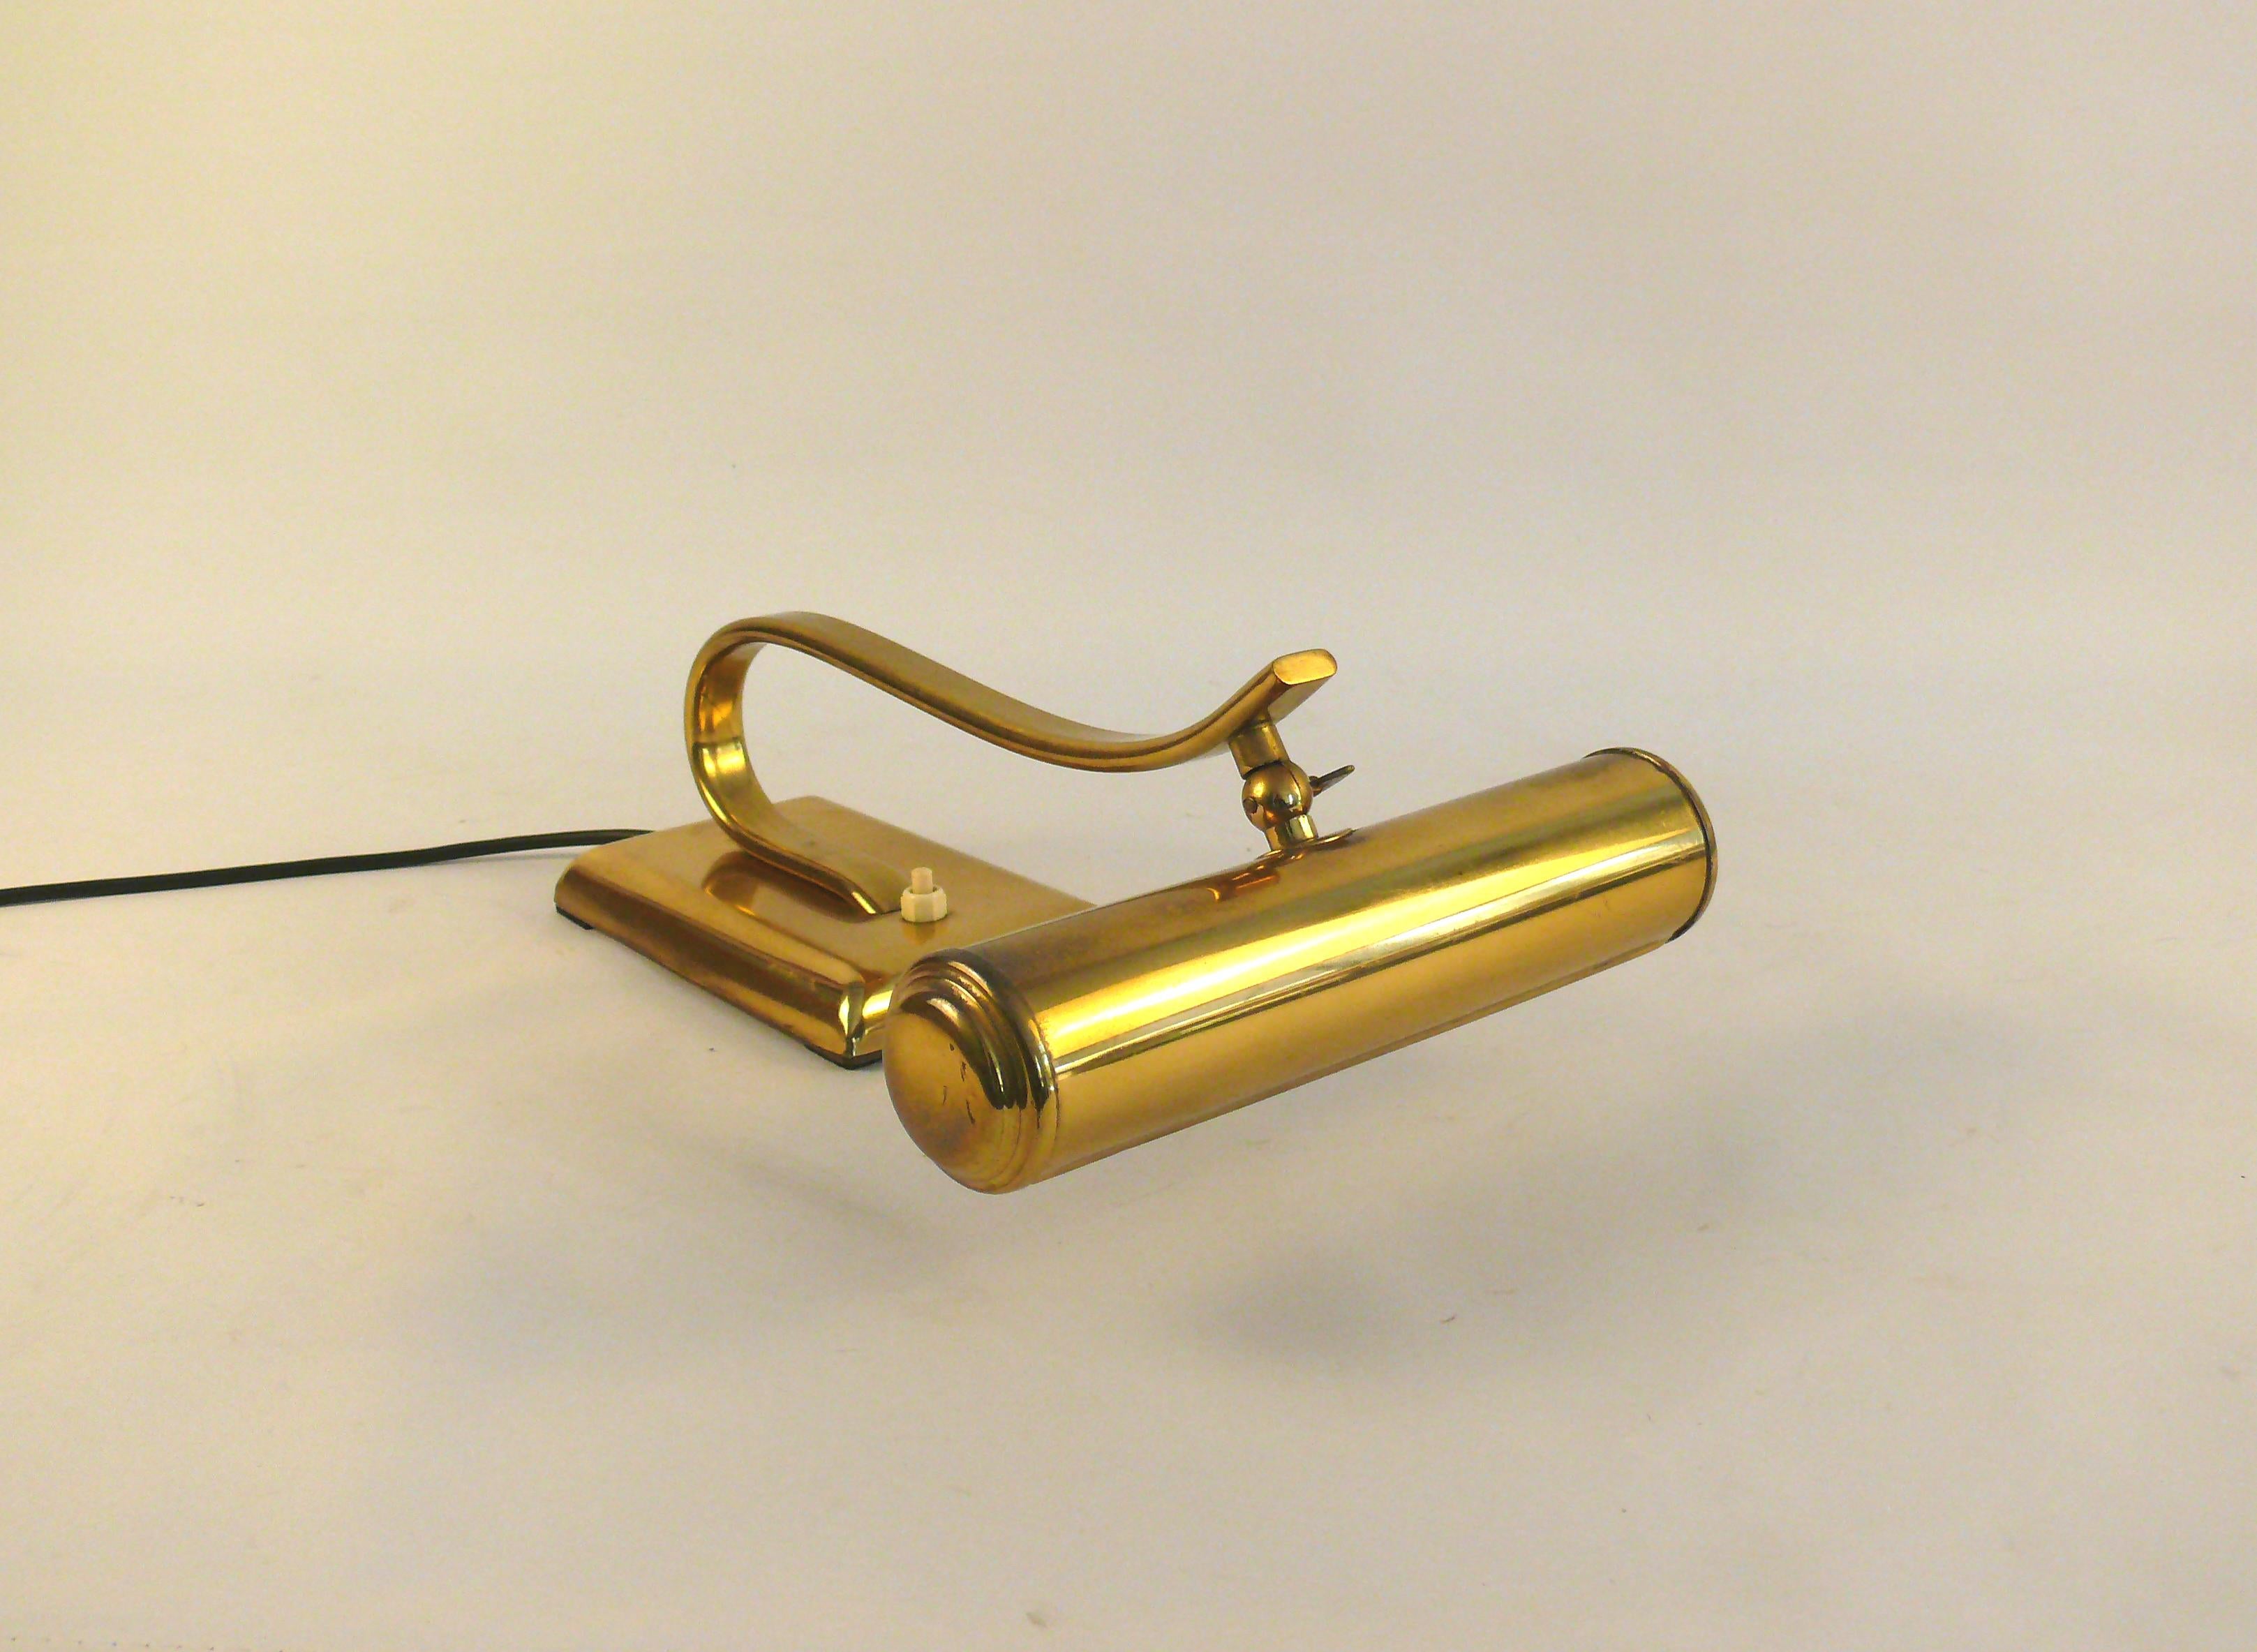 Art Deco piano lamp/table lamp from the 1930s - 1950s by the Heico company. The lamp is made of brass and metal. The screen can be tilted using a thumbscrew. The piano lamp has an E 14 socket made of brass - socket holder and socket may not be